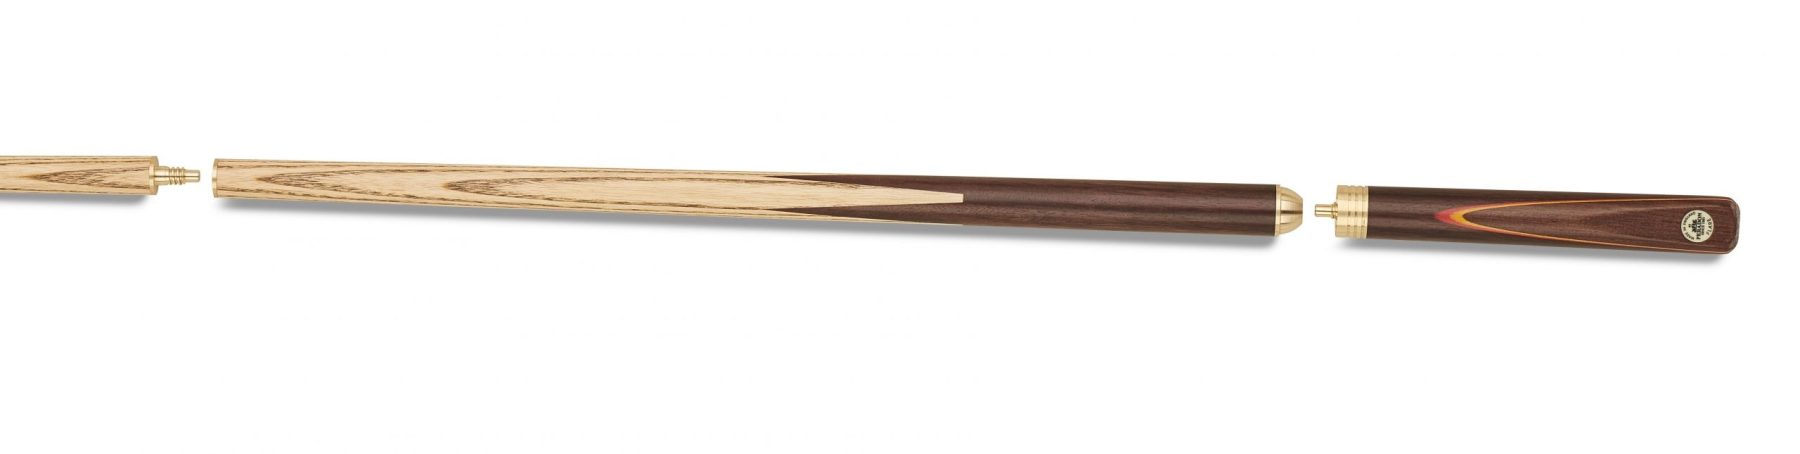 Flare Three Section 8 Ball Pool Cue